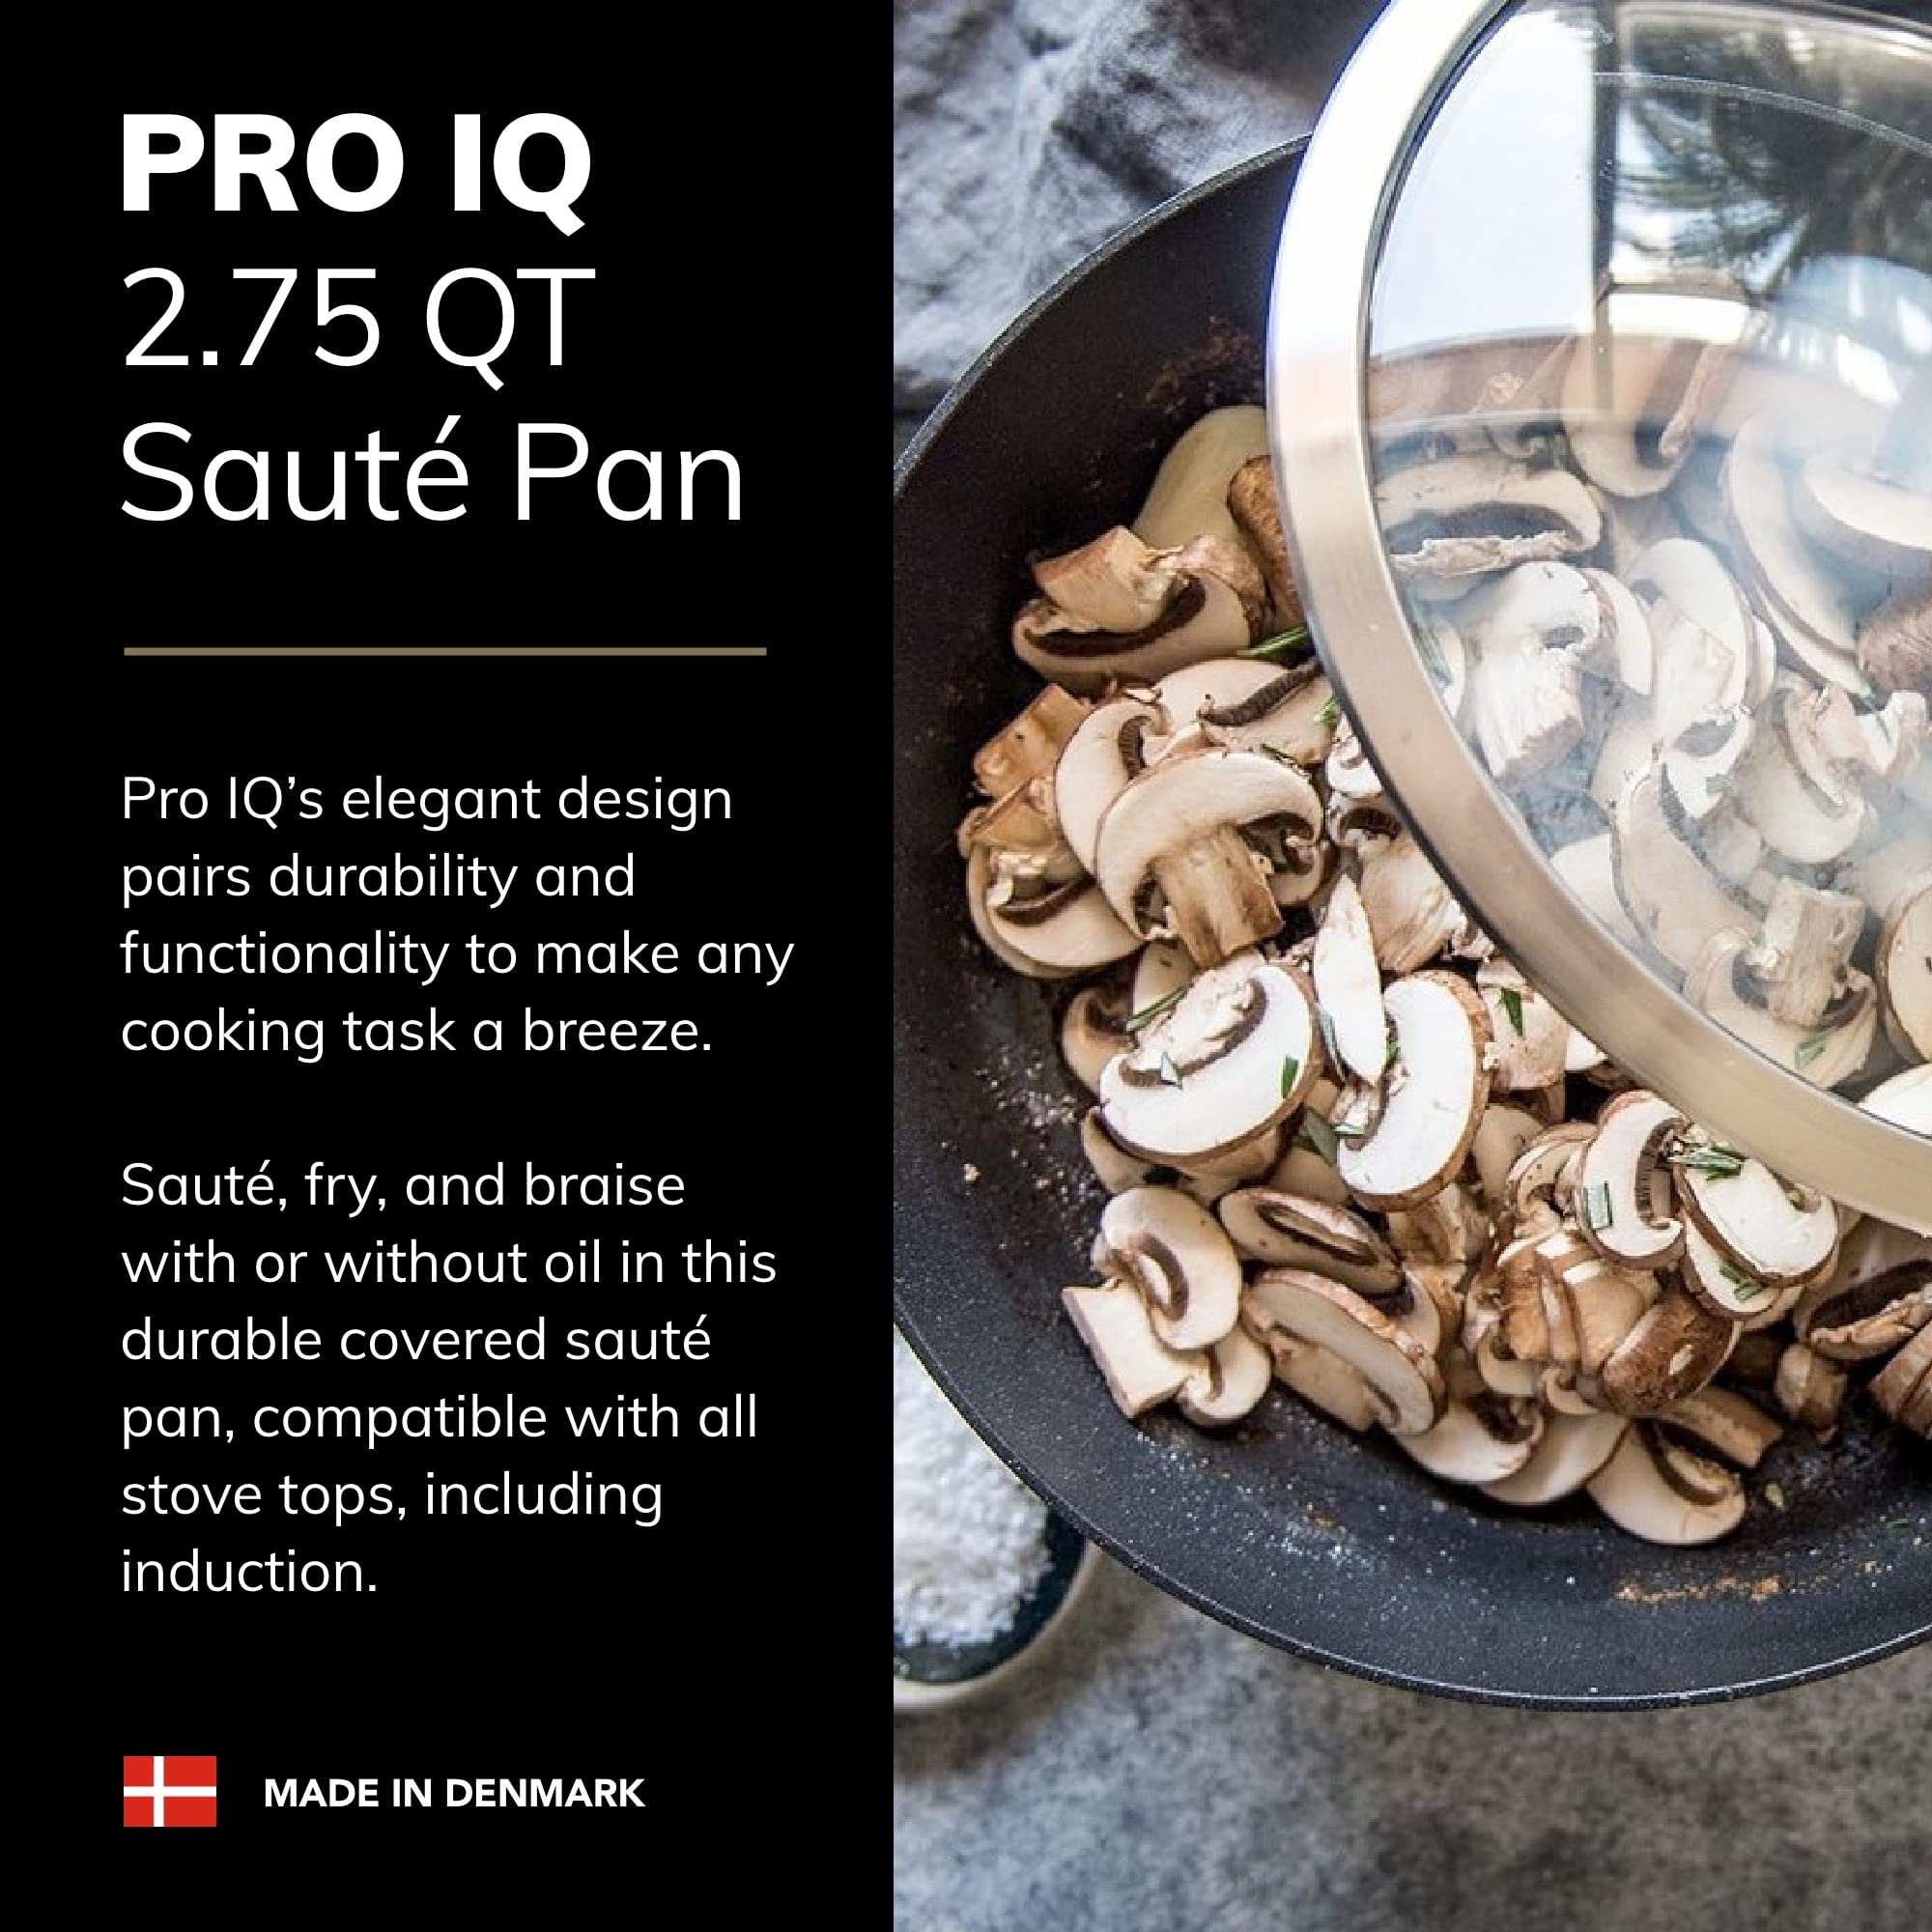 Scanpan Pro IQ 2.75 qt Covered Saute Pan - Easy-to-Use Nonstick Cookware - Dishwasher, Metal Utensil & Oven Safe - Made by Hand in Denmark